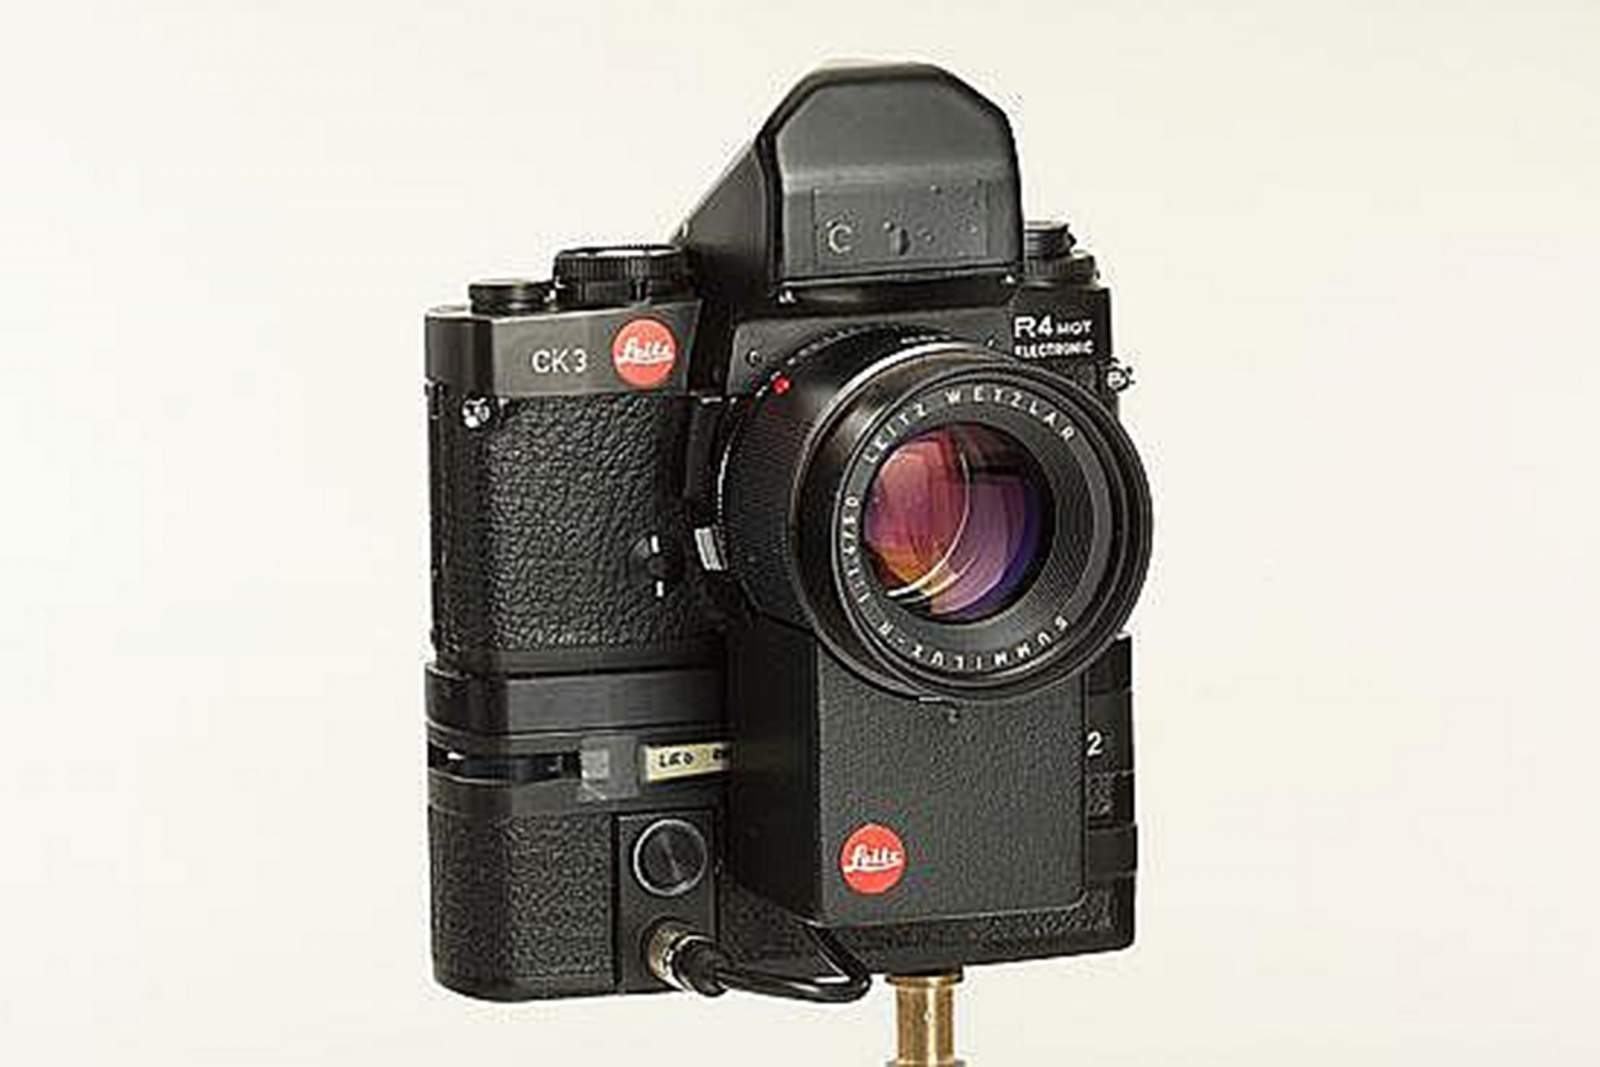 Leica invented the autofocus camera system with the Correfot in 1976.